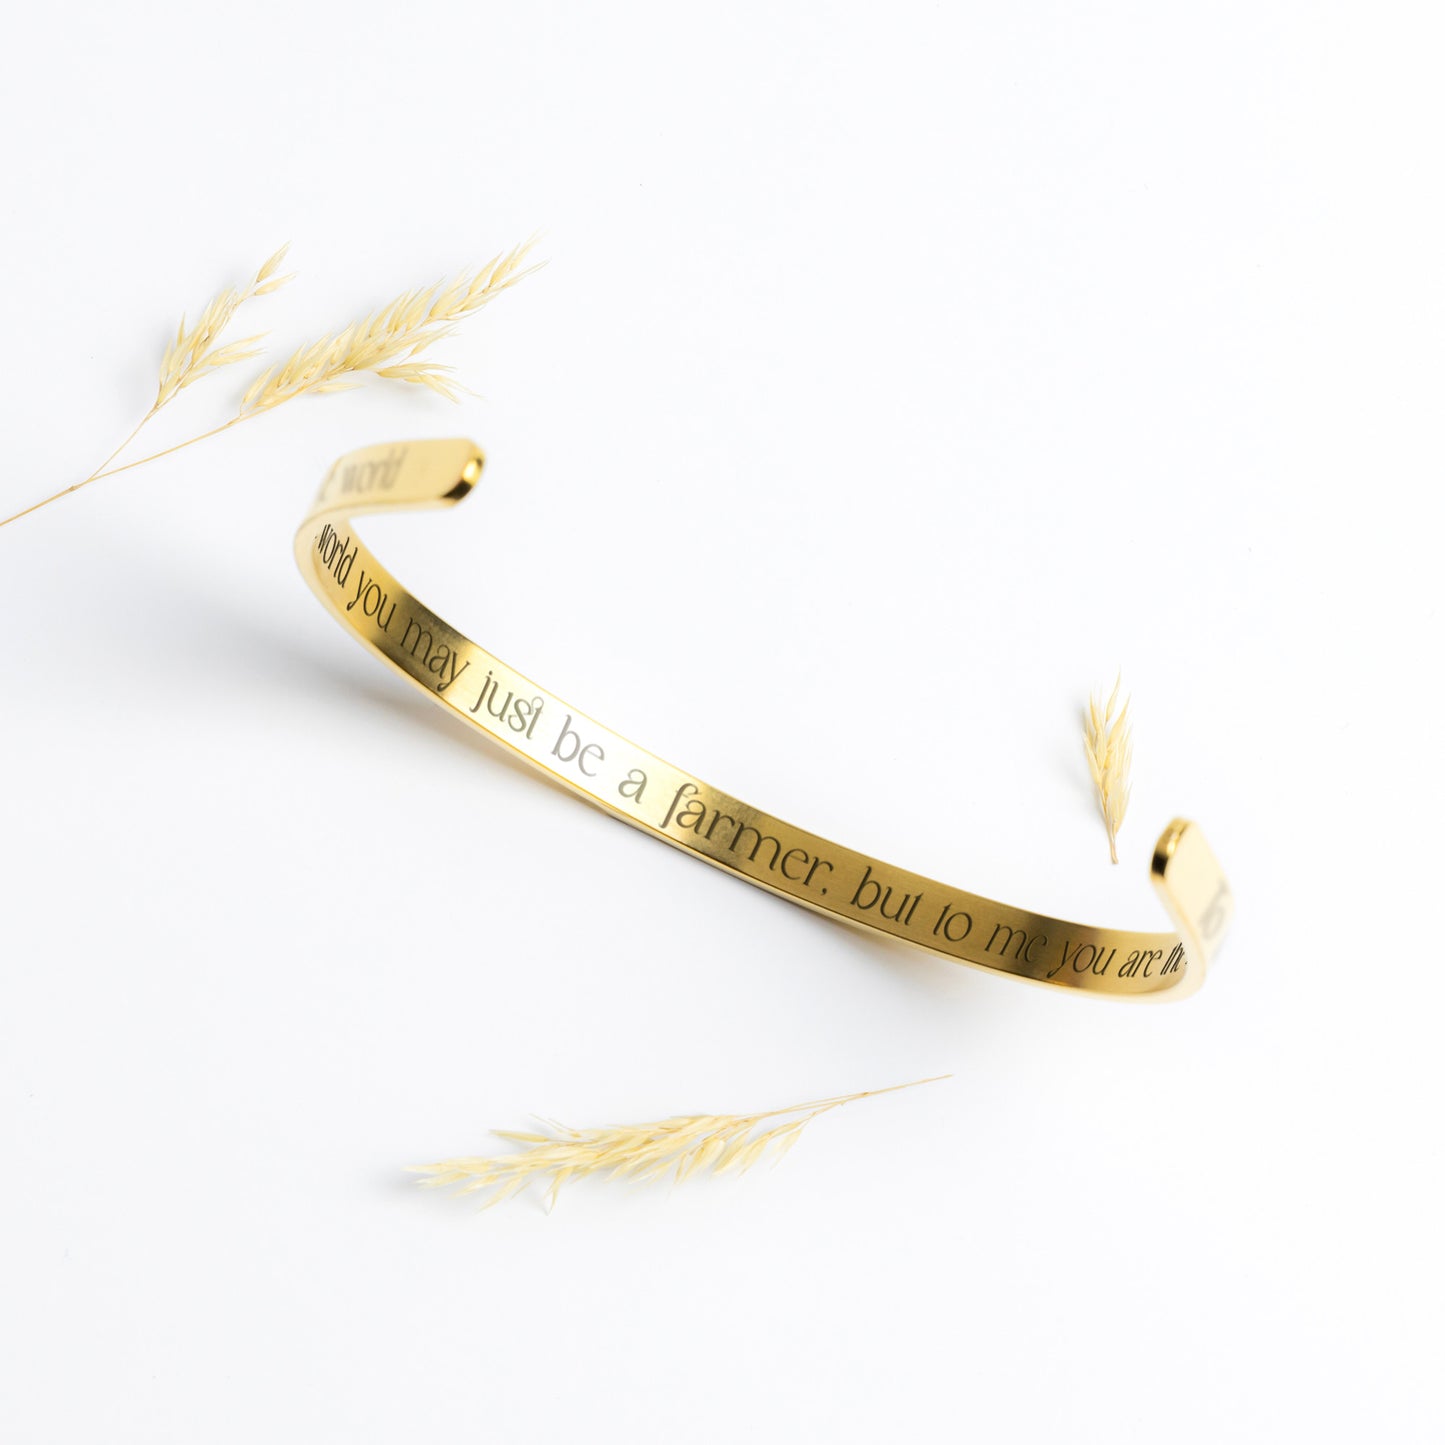 To The World You May Just Be a Farmer, But To Me You Are The World - Cuff Bracelet - FREE SHIPPING